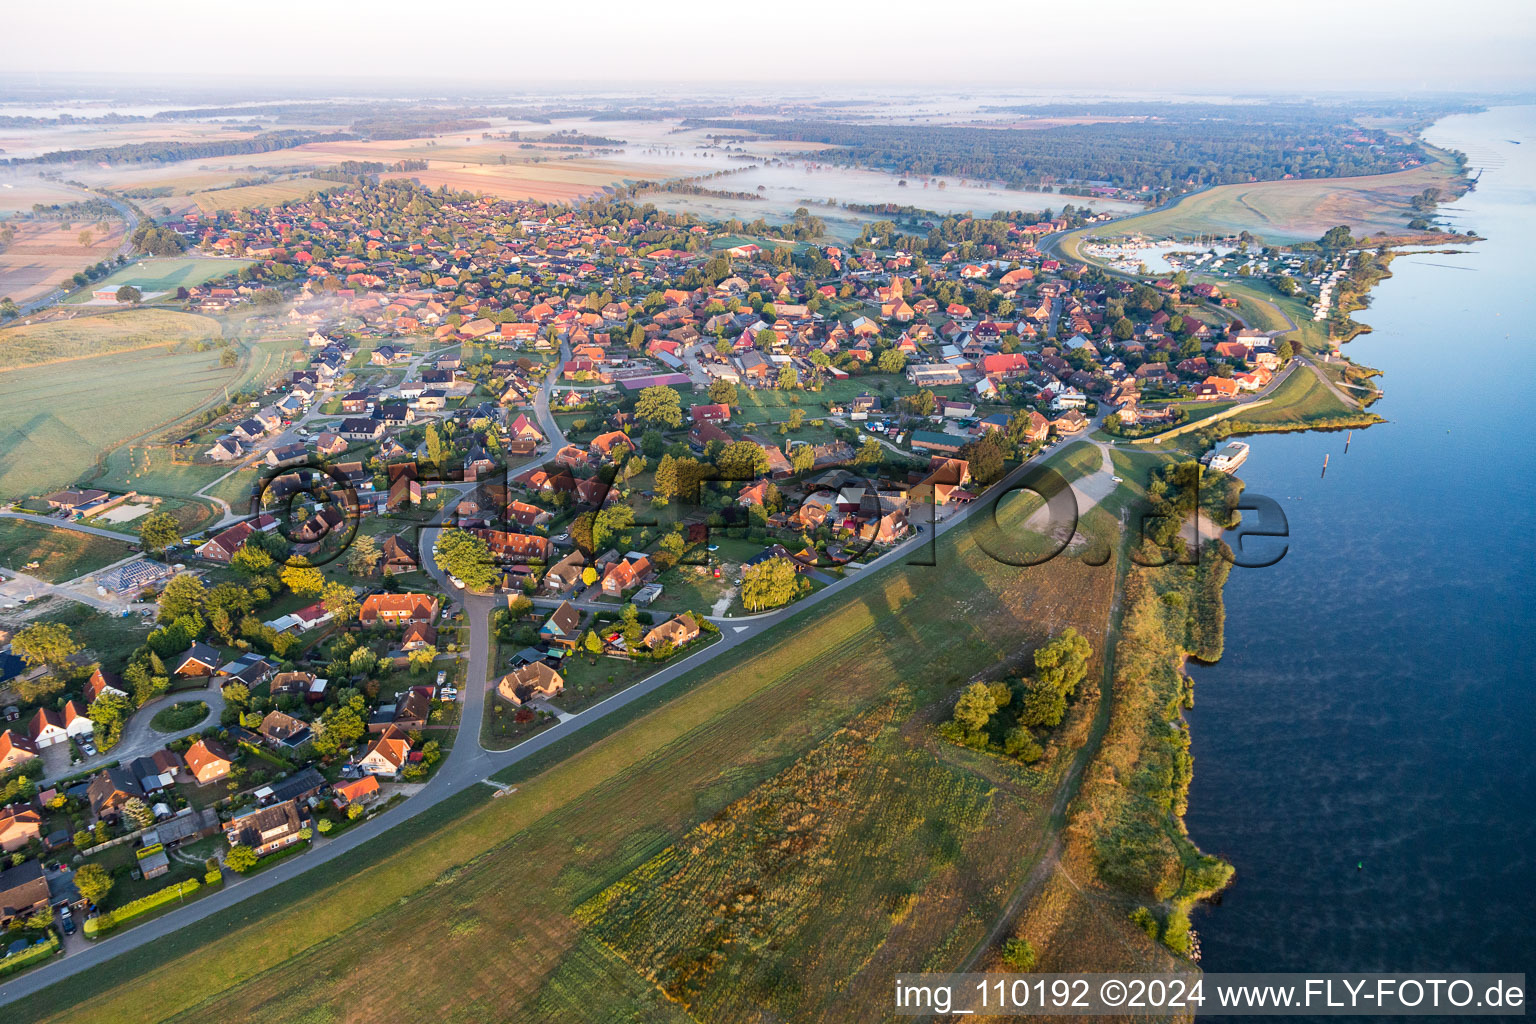 Village on the river bank areas of the River Elbe in Artlenburg in the state Lower Saxony, Germany